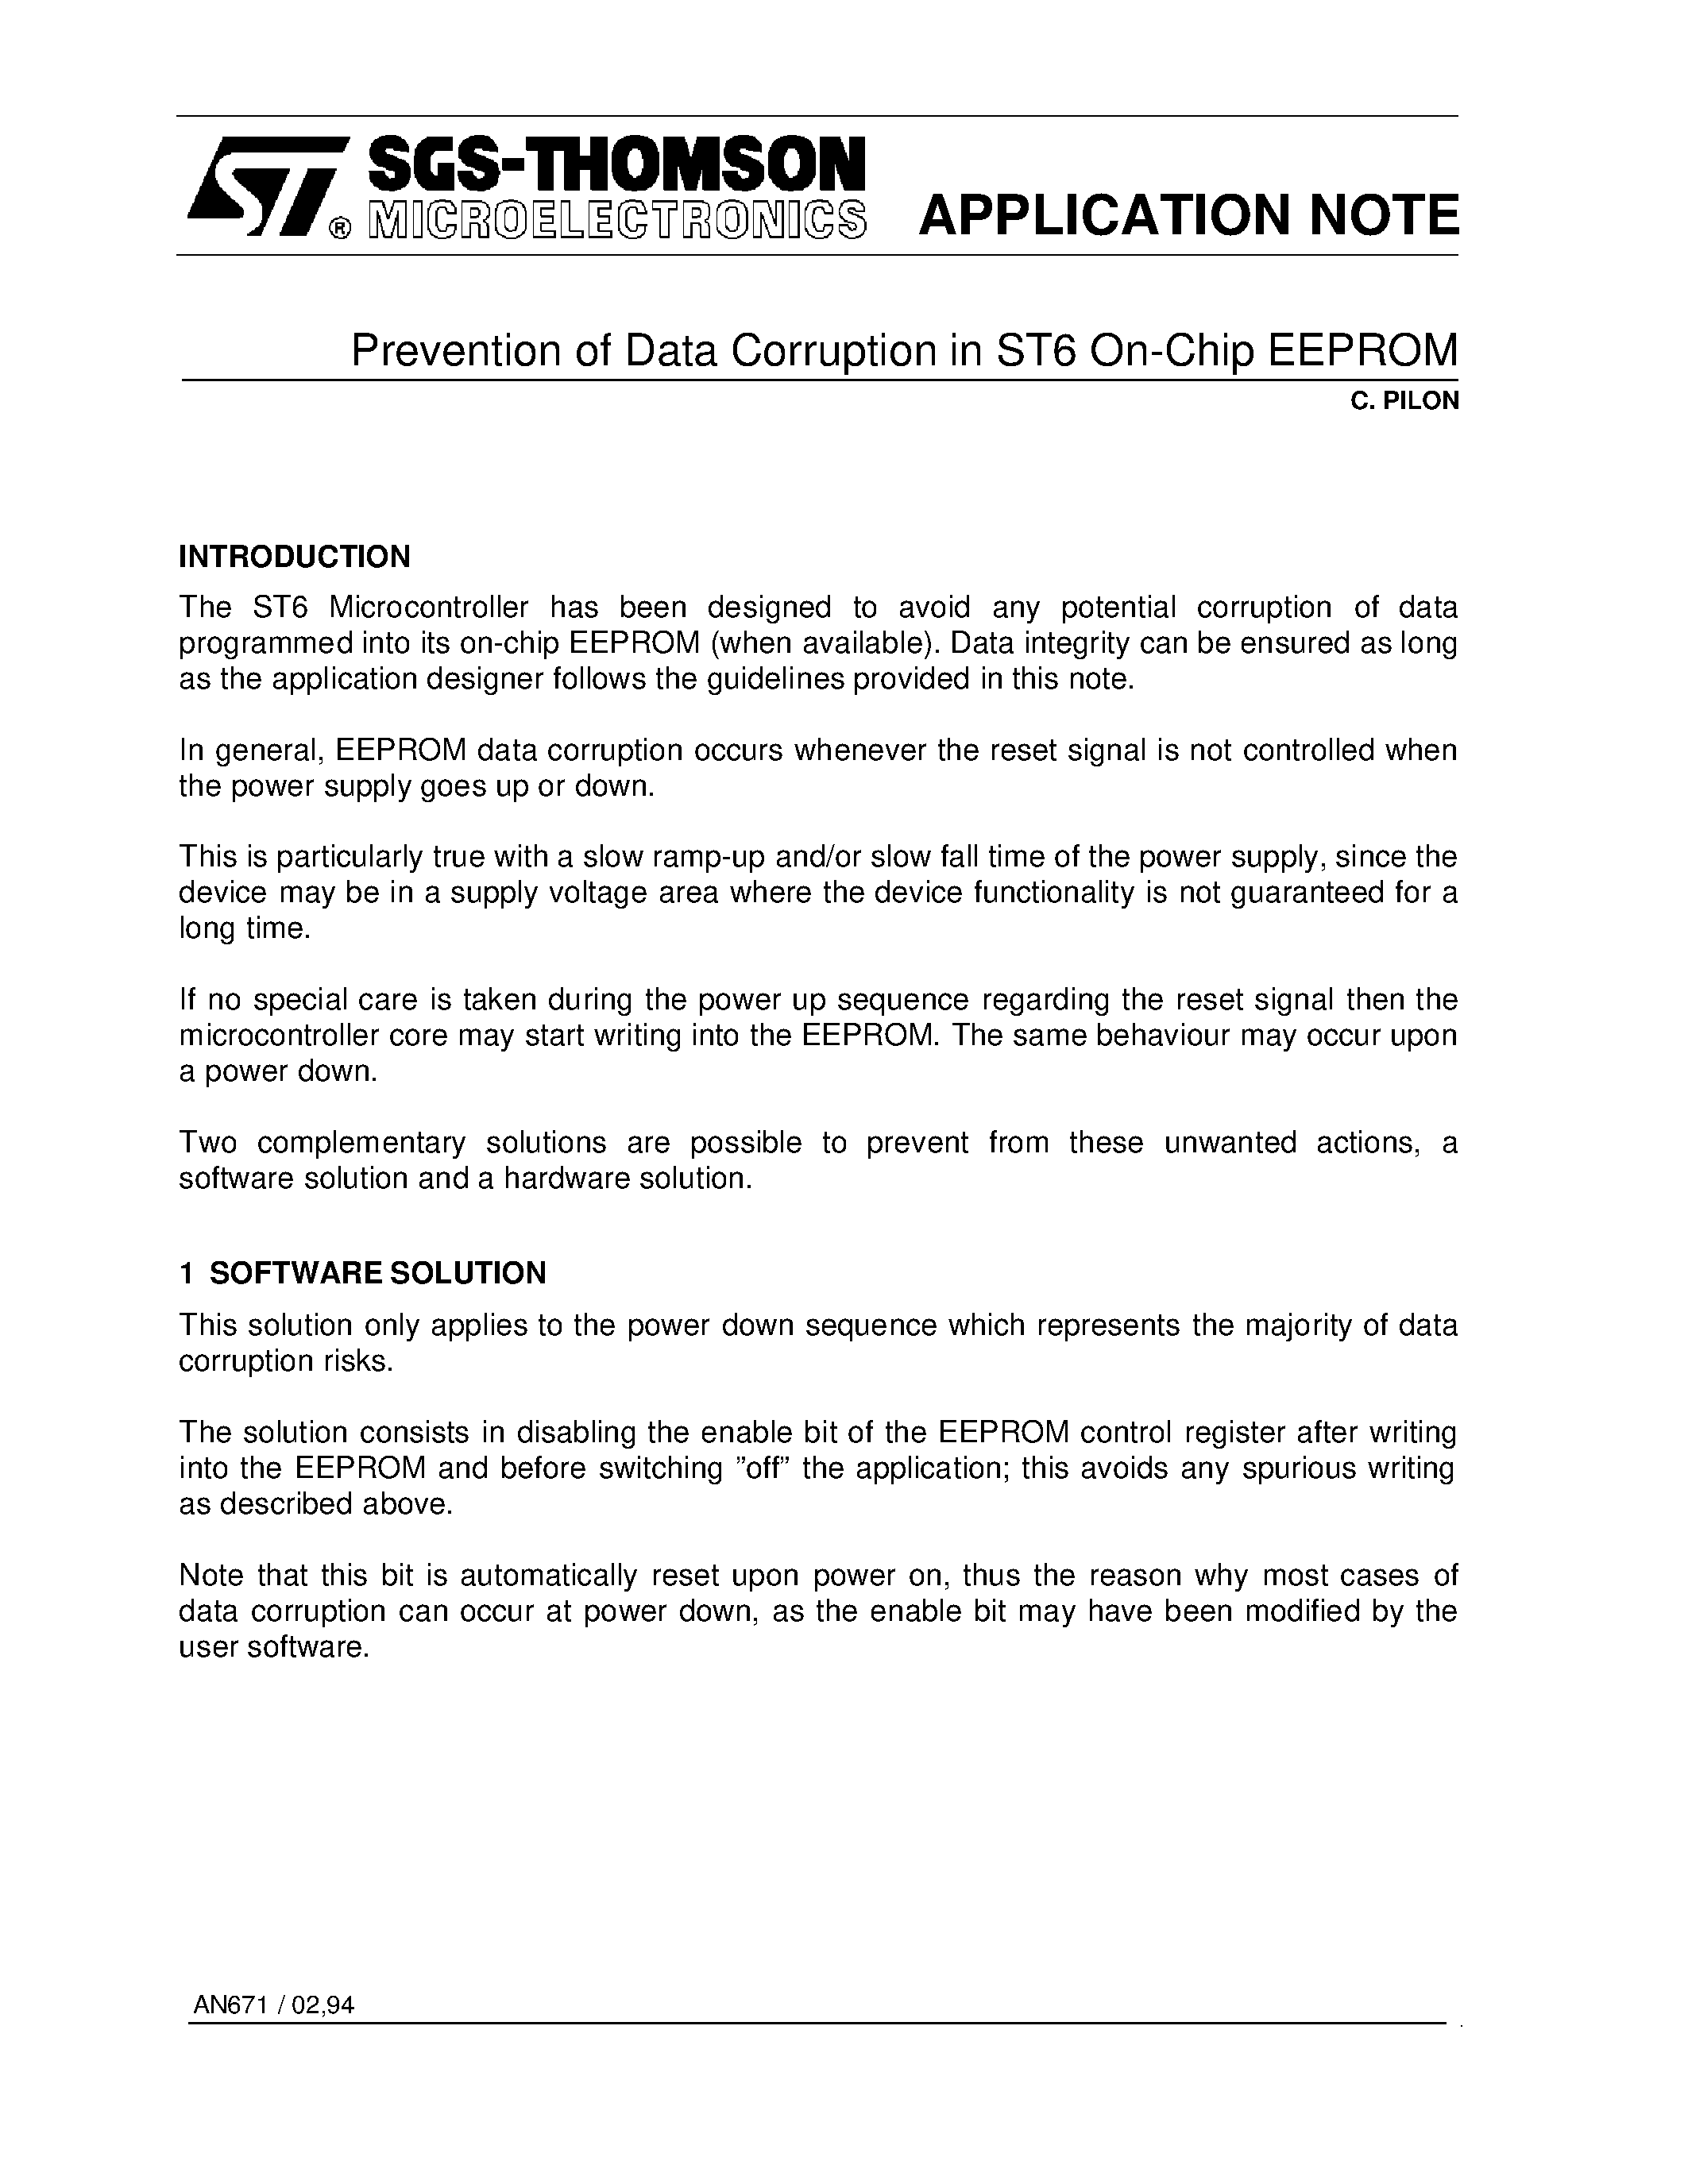 Datasheet AN671 - Prevention of Data Corruption in ST6 On-Chip EEPROM page 1